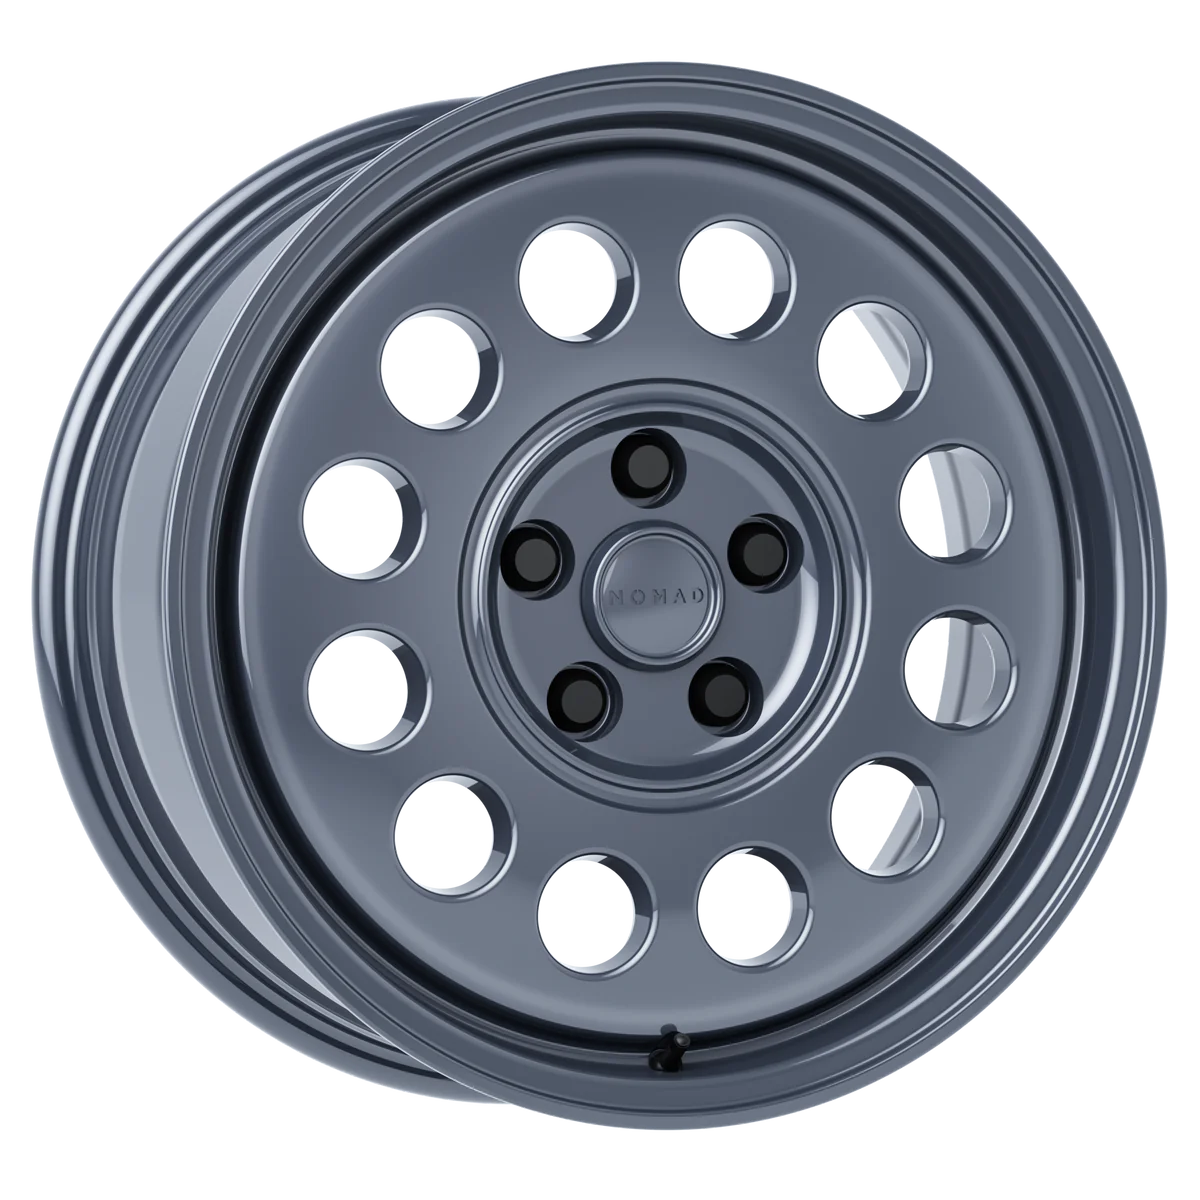 Nomad N501UG Convoy 17x8.5in / 6x139.7 BP / -10mm Offset / 106.1mm Bore - Gloss Grey Wheel